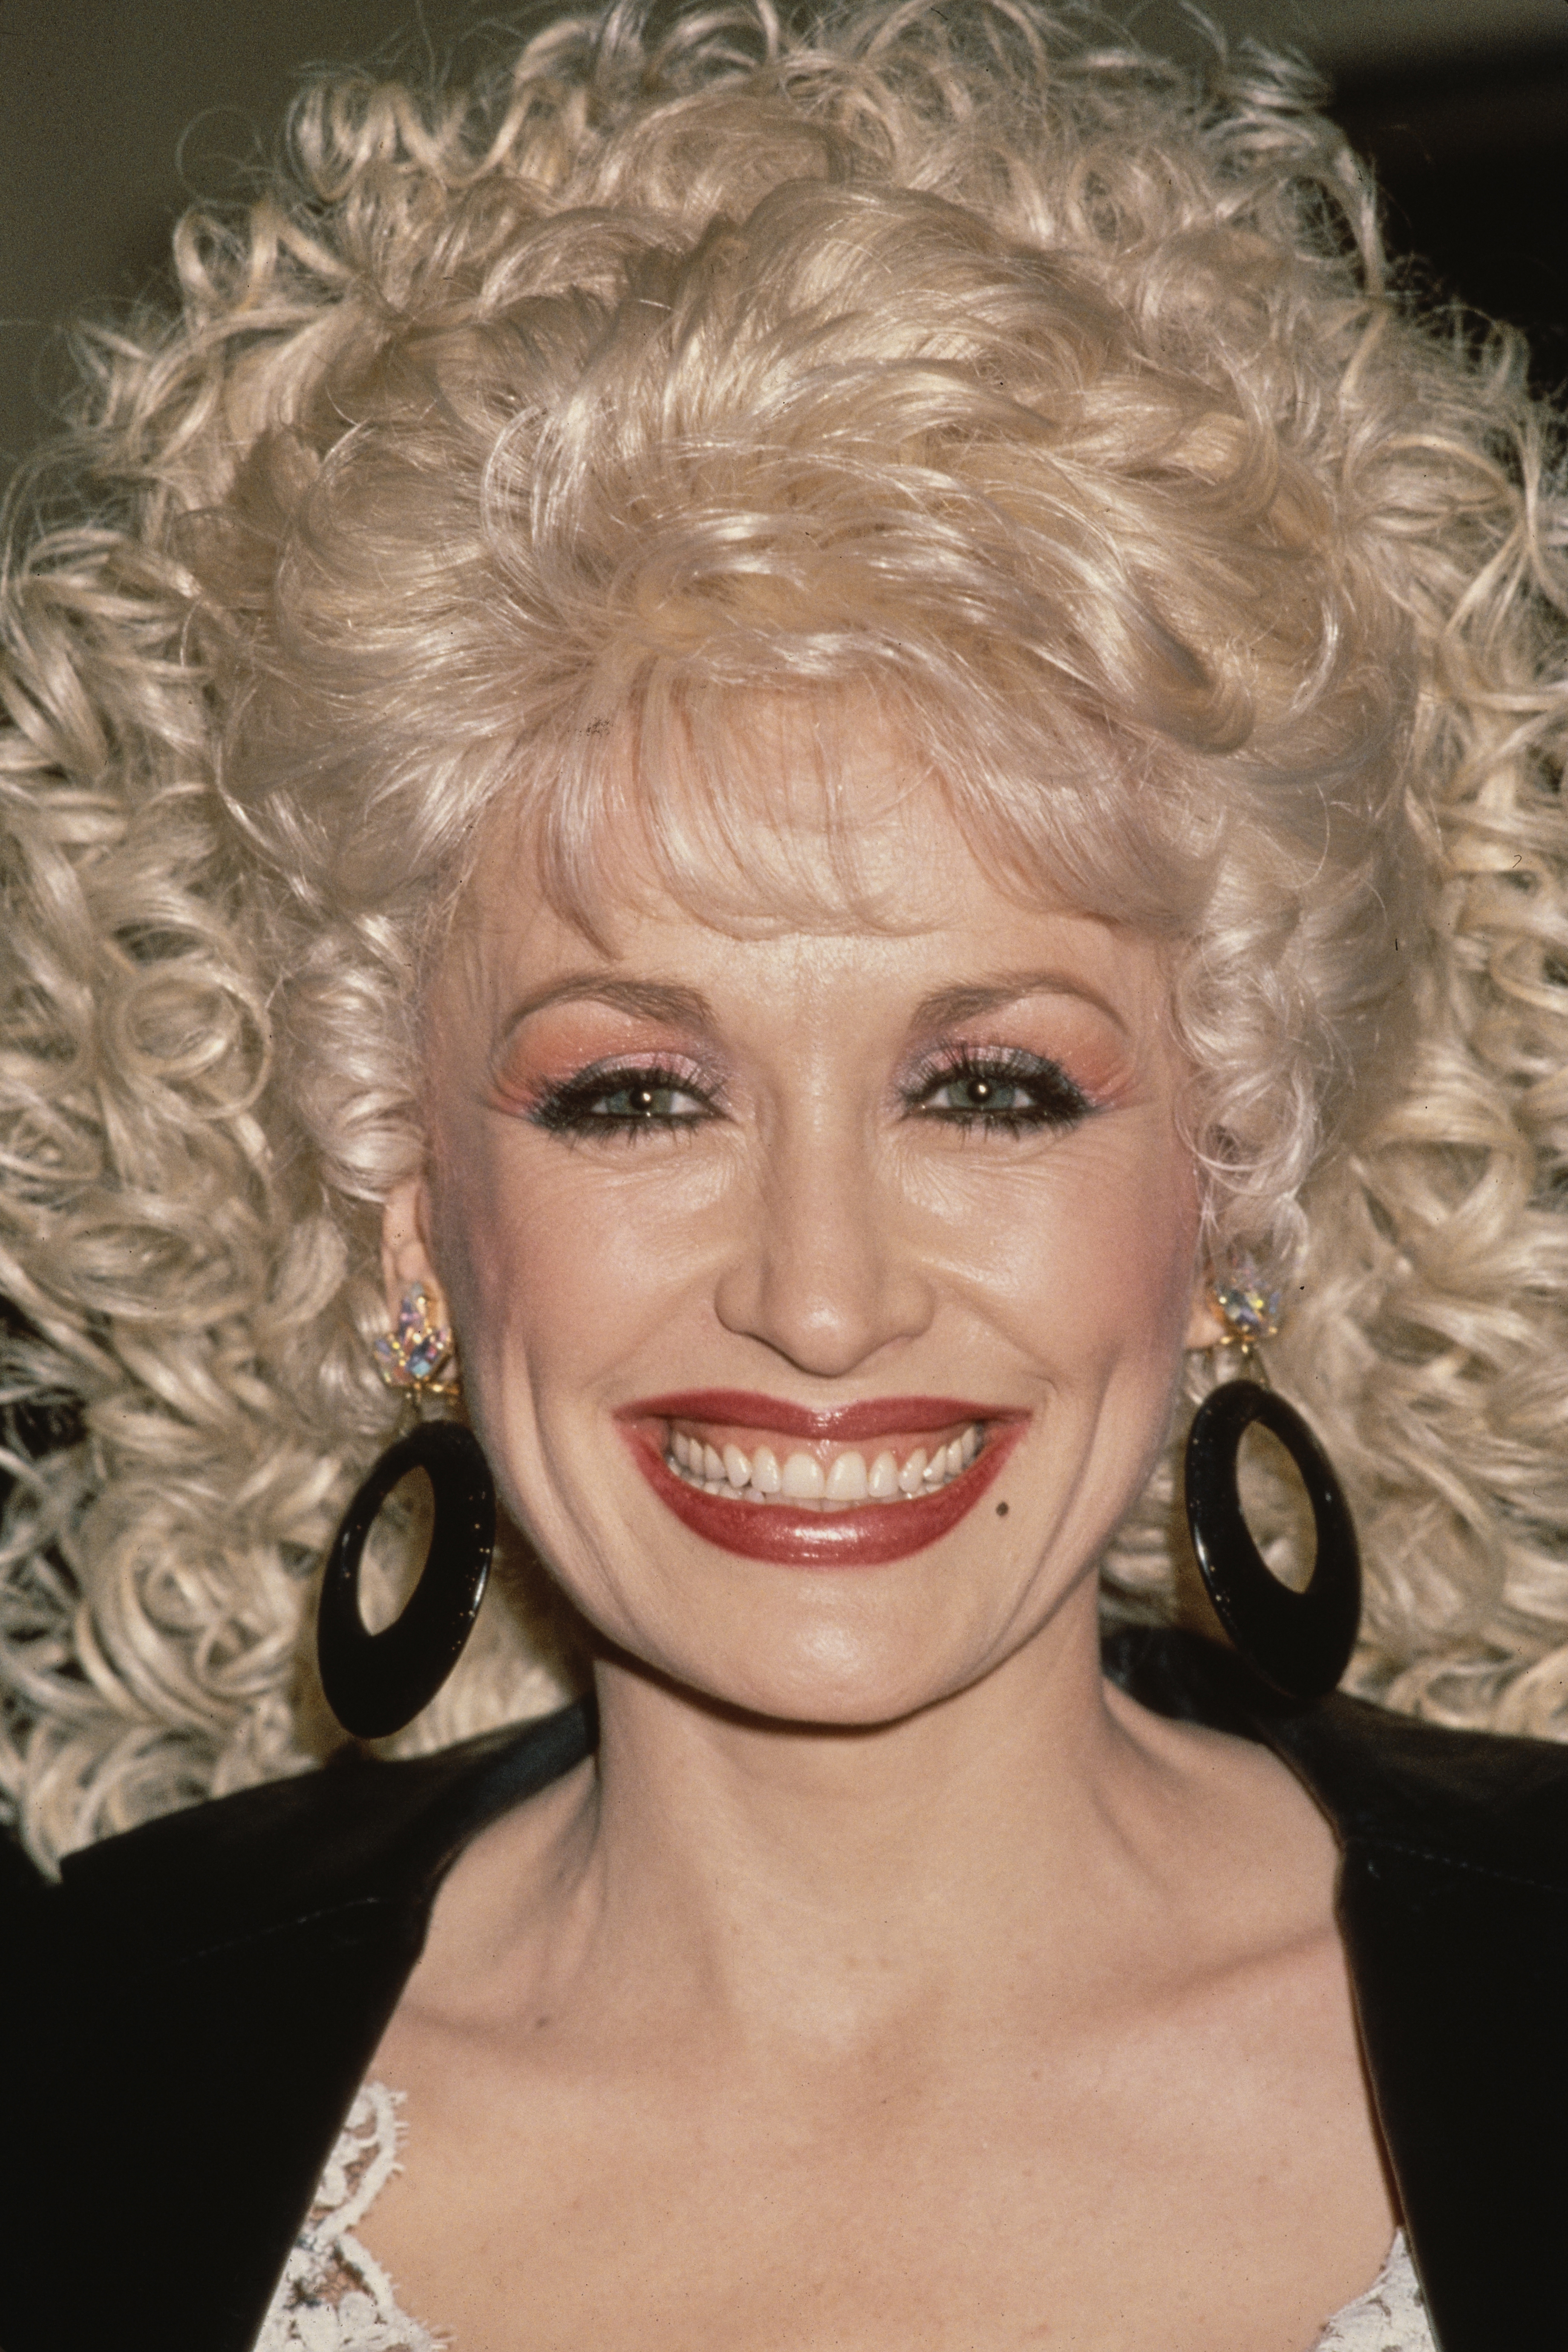 Dolly Parton at an event in the US in 1987 | Source: Getty Images